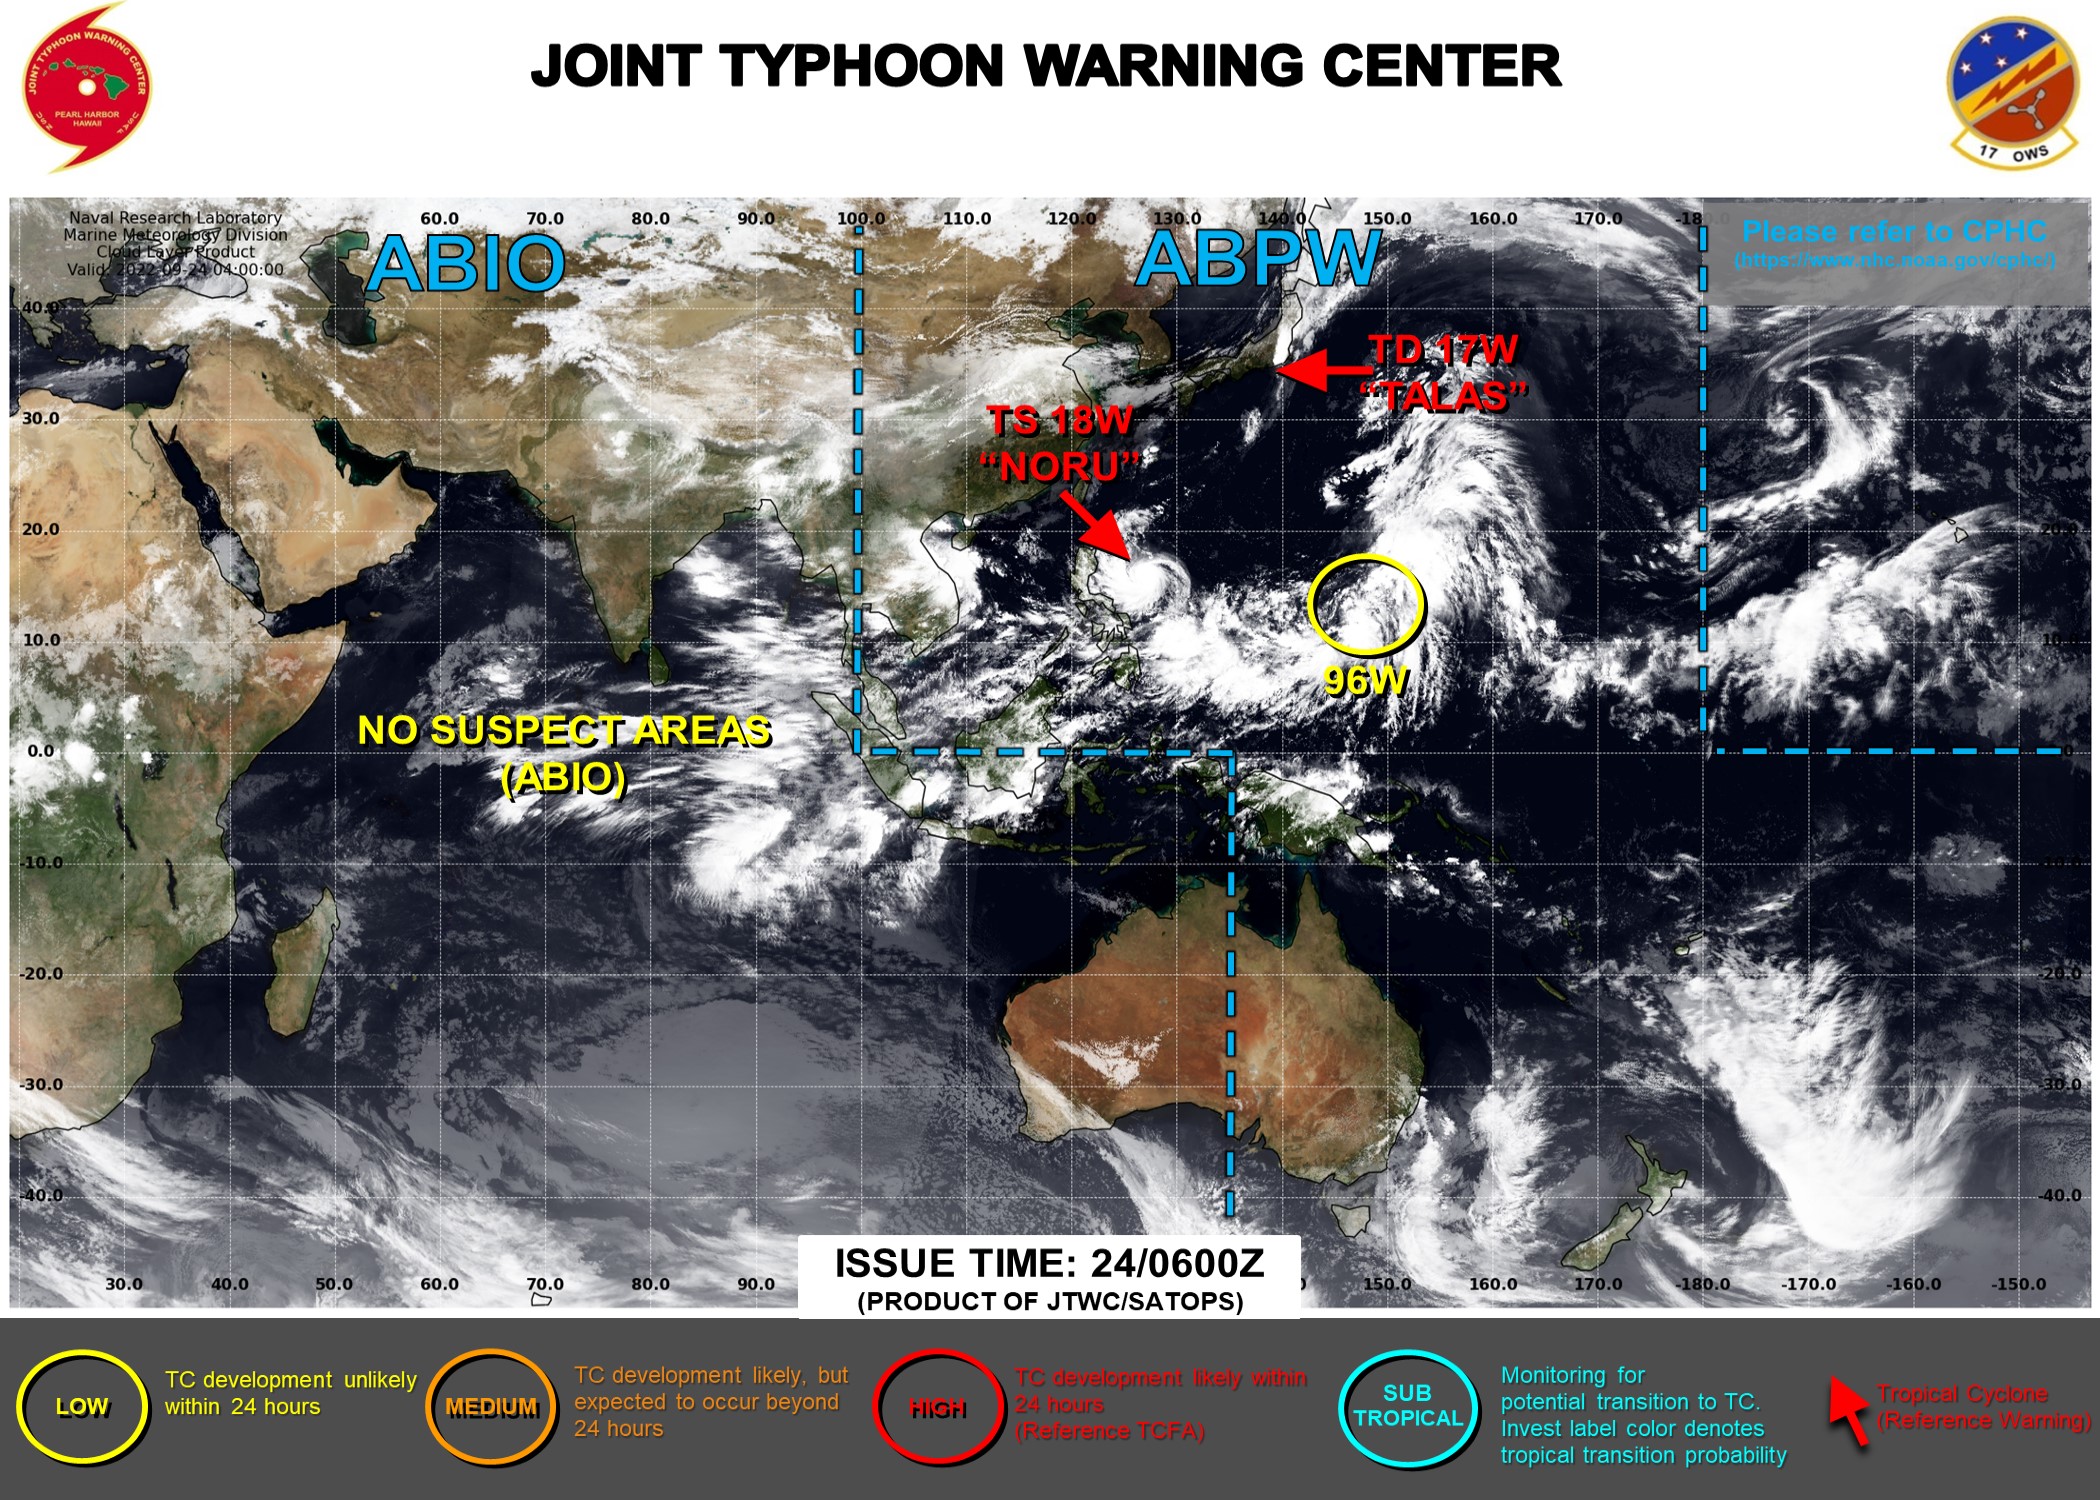 JTWC IS ISSUING 6HOURLY WARNINGS AND 3HOURLY SATELLITE BULLETINS ON 18W. WARNINGS AND SATELLITE BULLETINS WERE DISCONTINUED ON 17W AT 24/03UTC